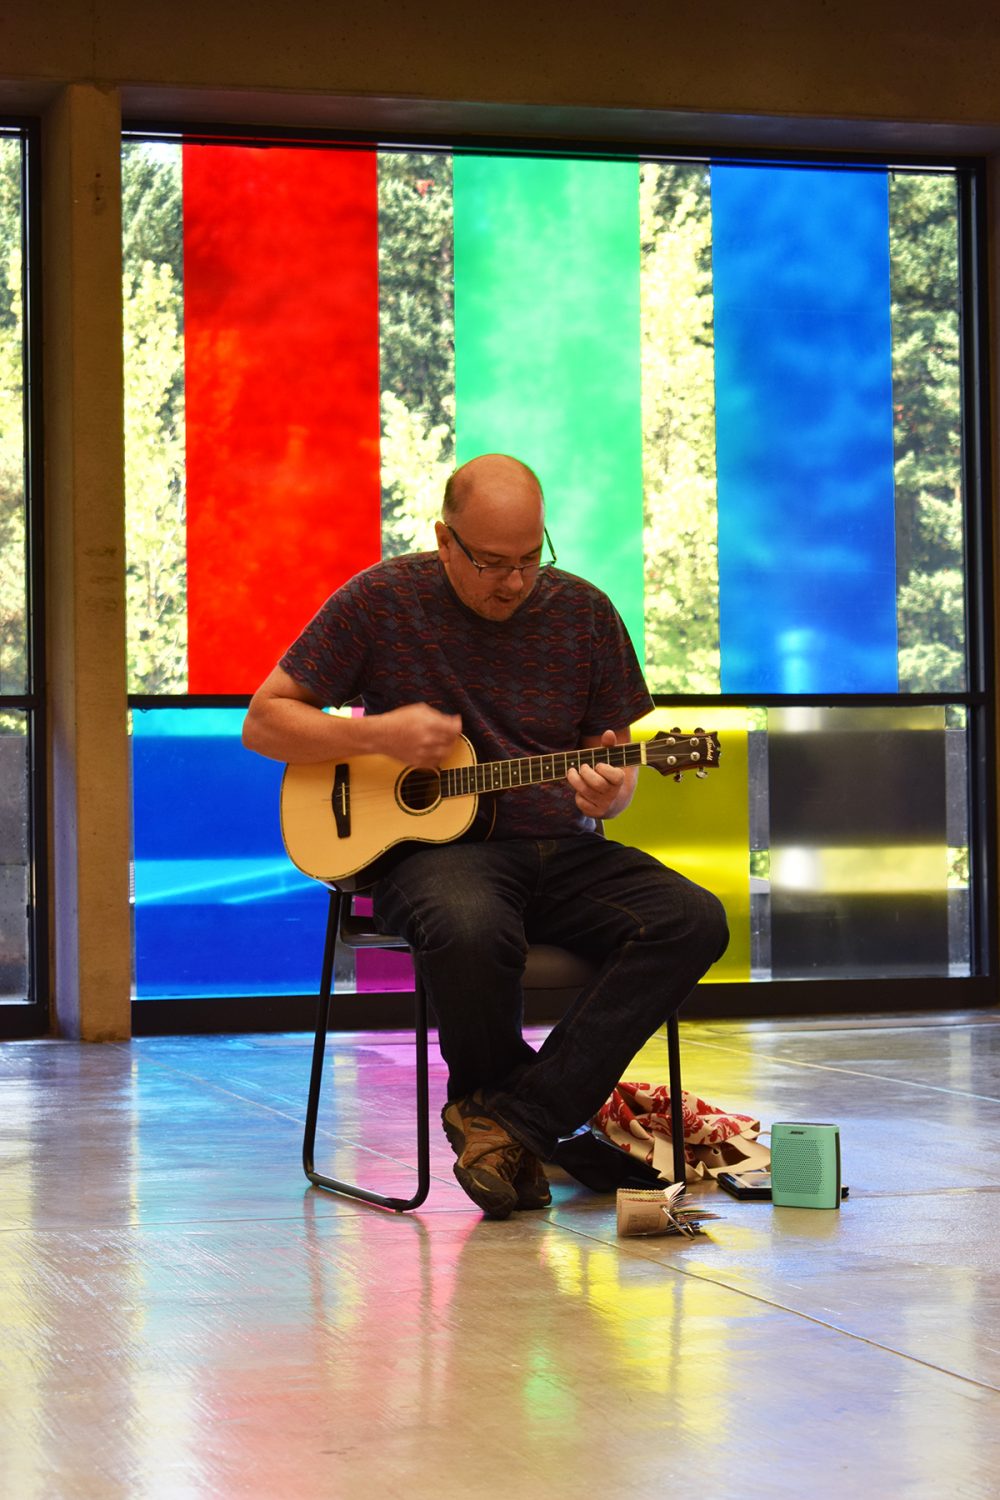 View of performance for the exhibition. A man is sitting on a chair playing a small guitar. On the floor beside him are objects. . Behind him is a wall of glass with large bands of blue, red, yellow and green vinyl.